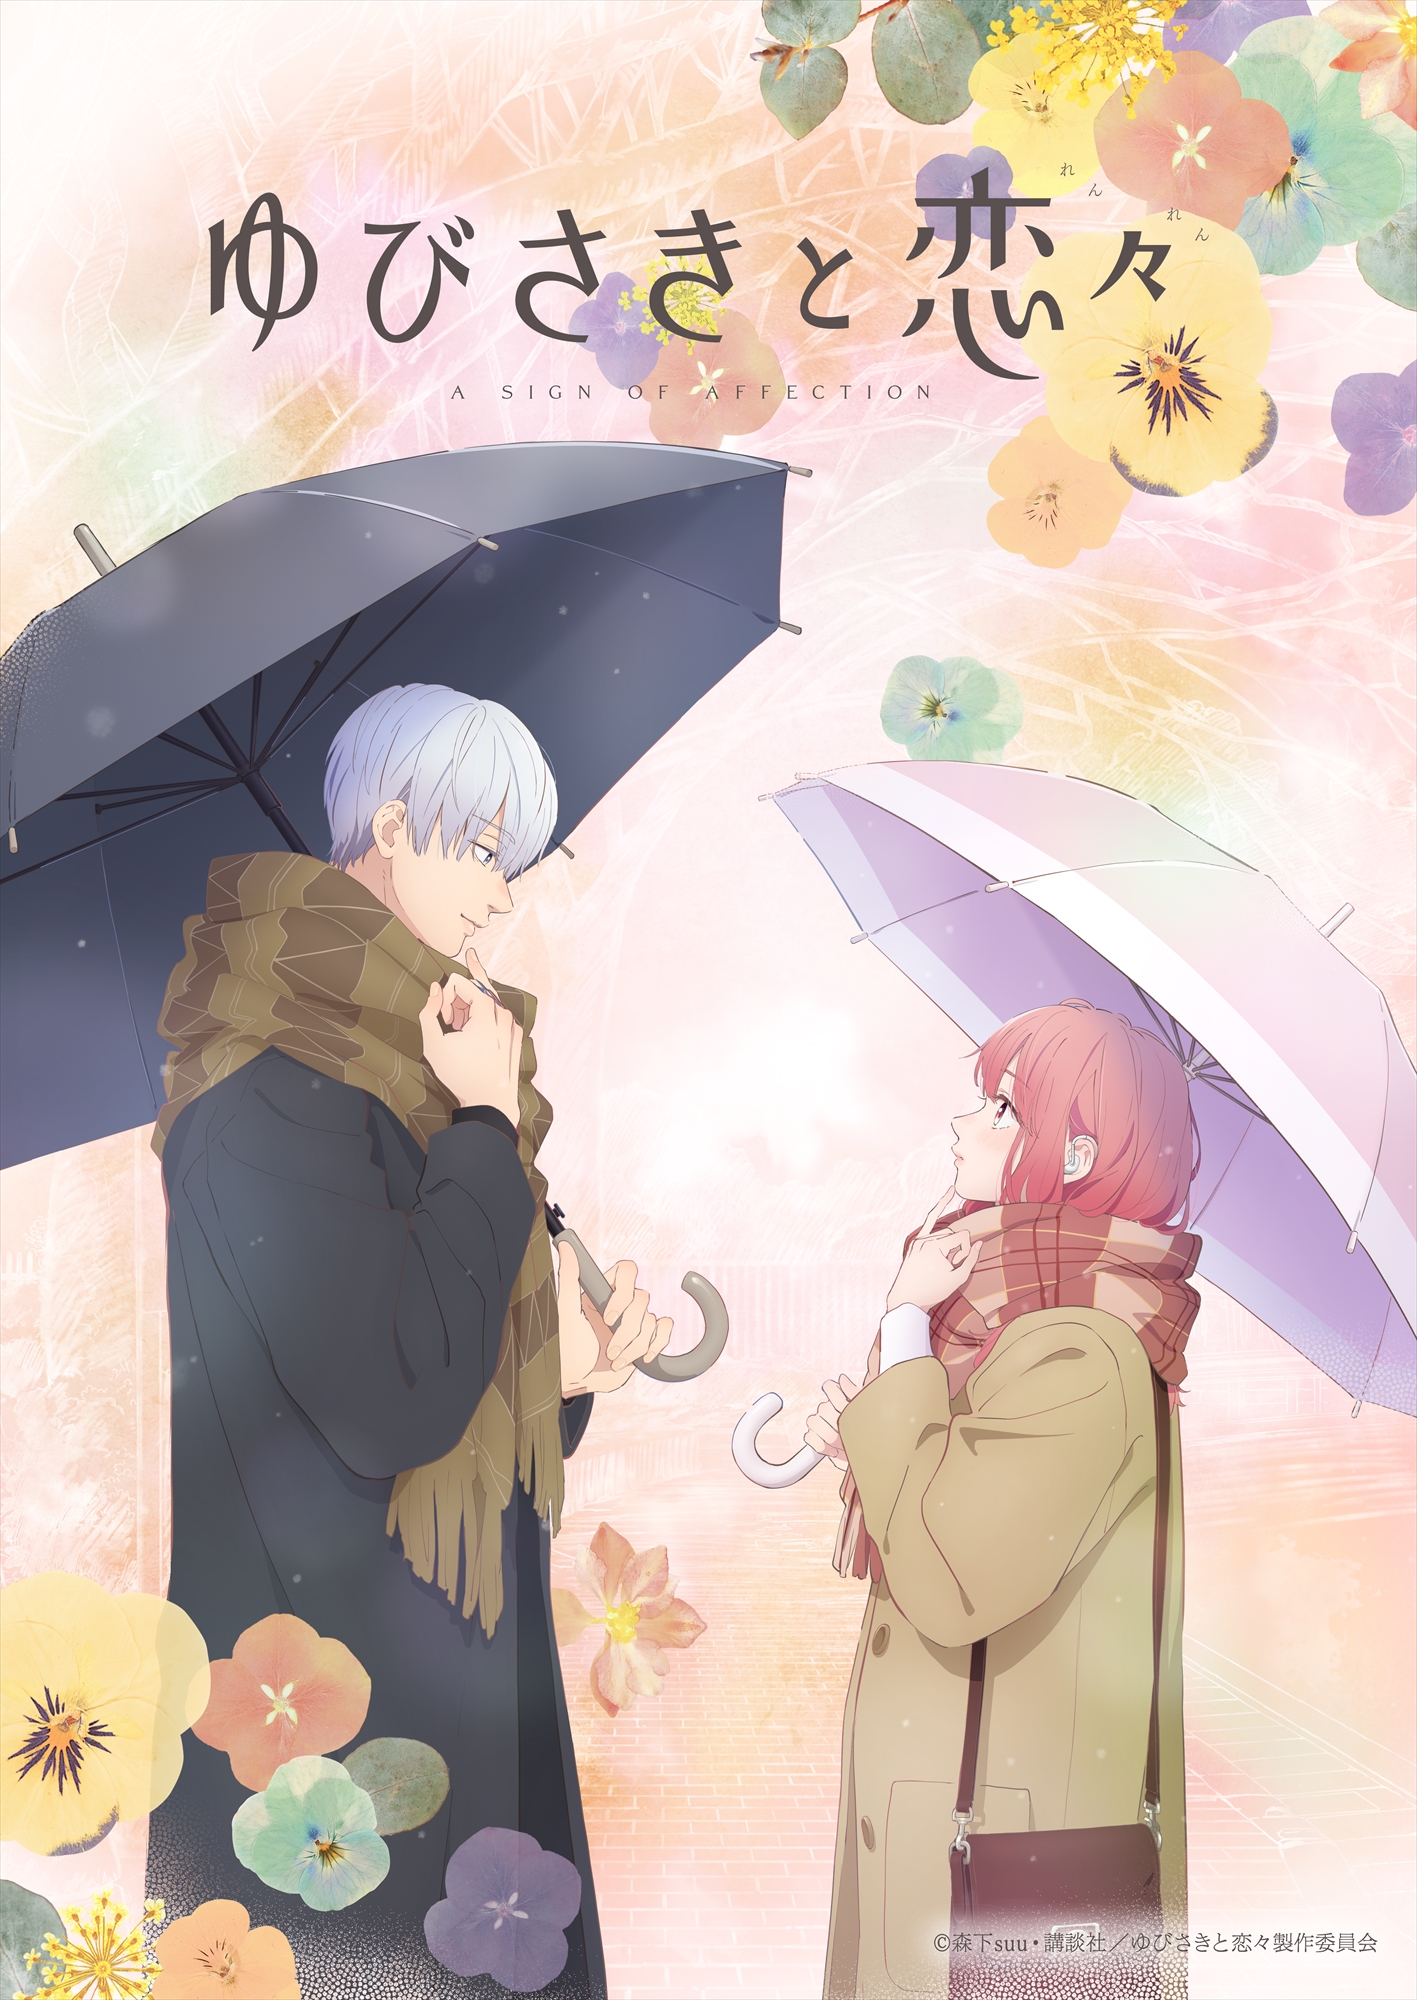 A Sign of Affection Manga Goes on Hiatus Due to Storyboard Writer Giving  Birth - News - Anime News Network